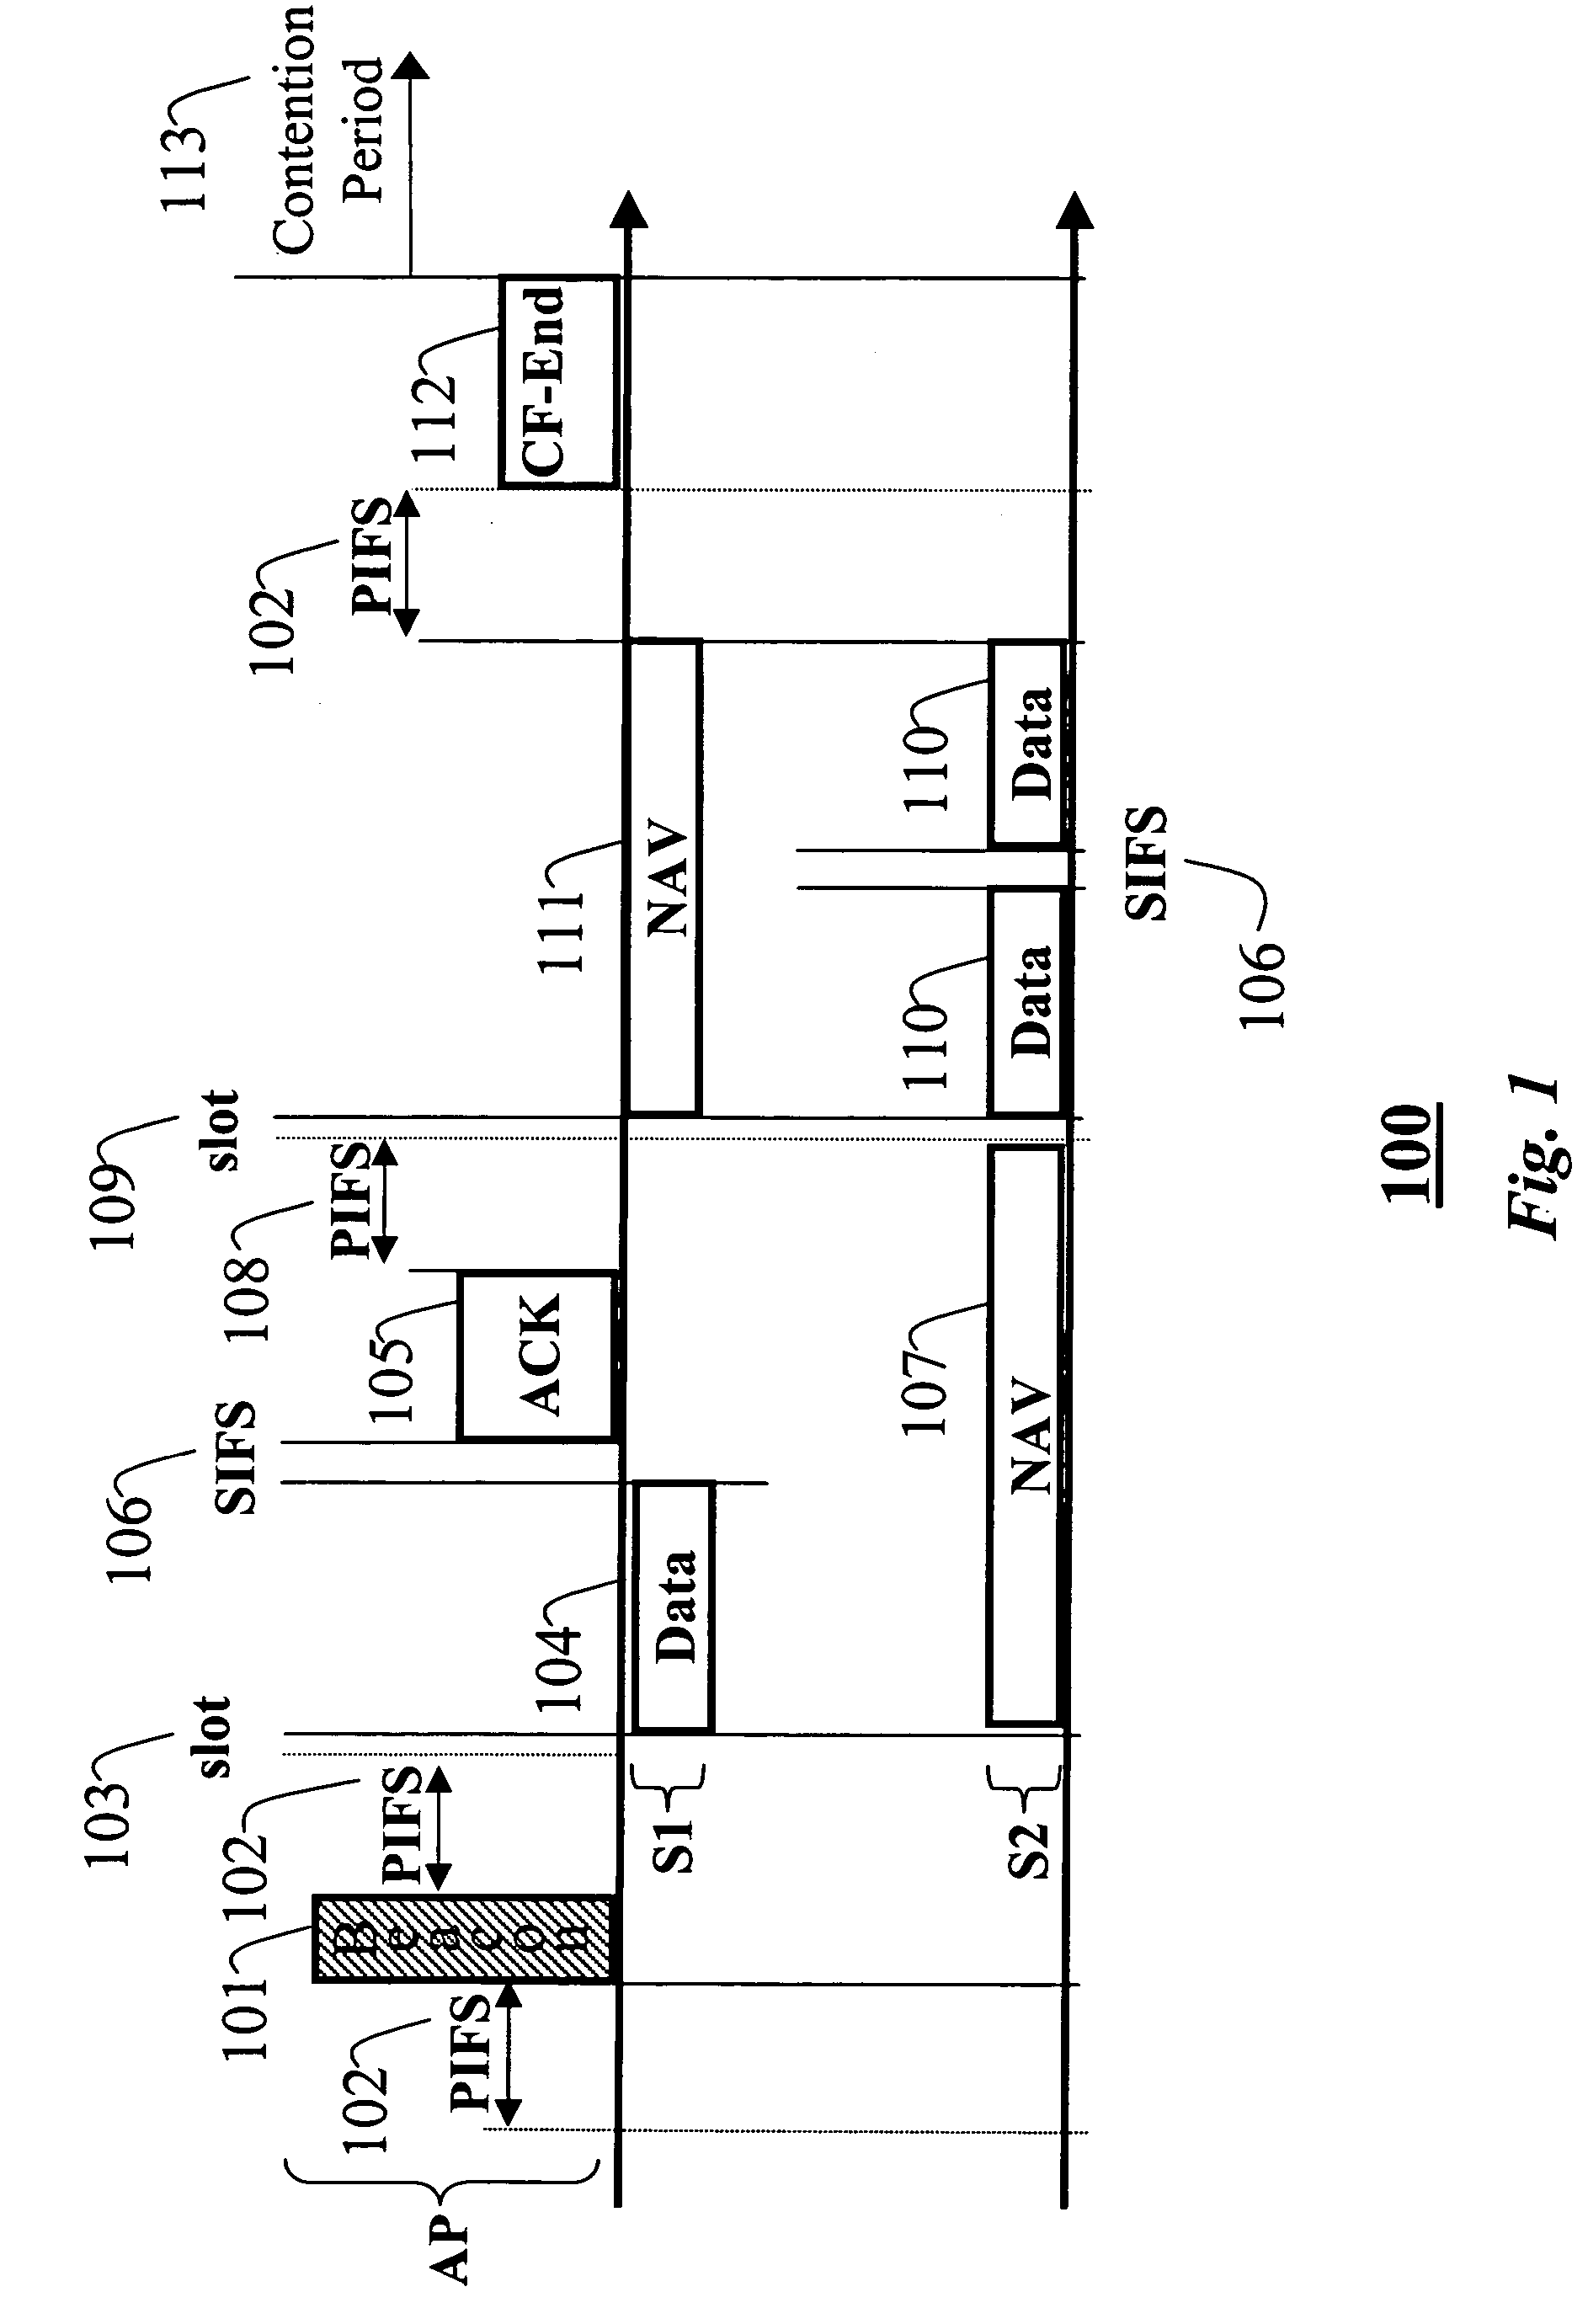 Sequential coordinated channel access in wireless networks